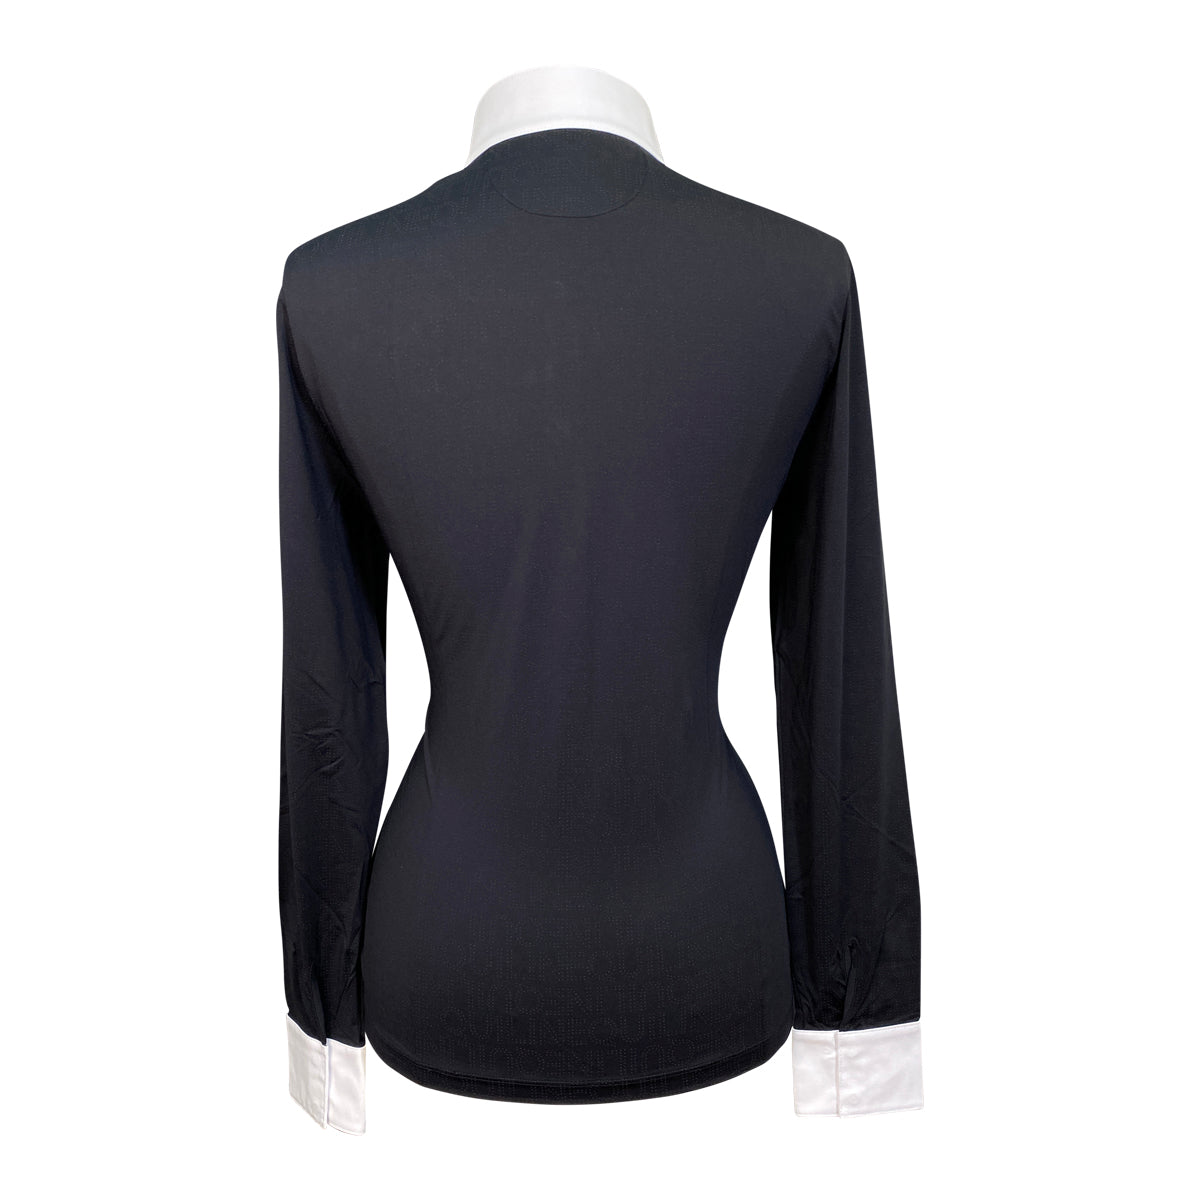 Equiline &#39;Cindrac&#39; Long Sleeve Show Shirt in Black - Women&#39;s IT 44 (US 10)